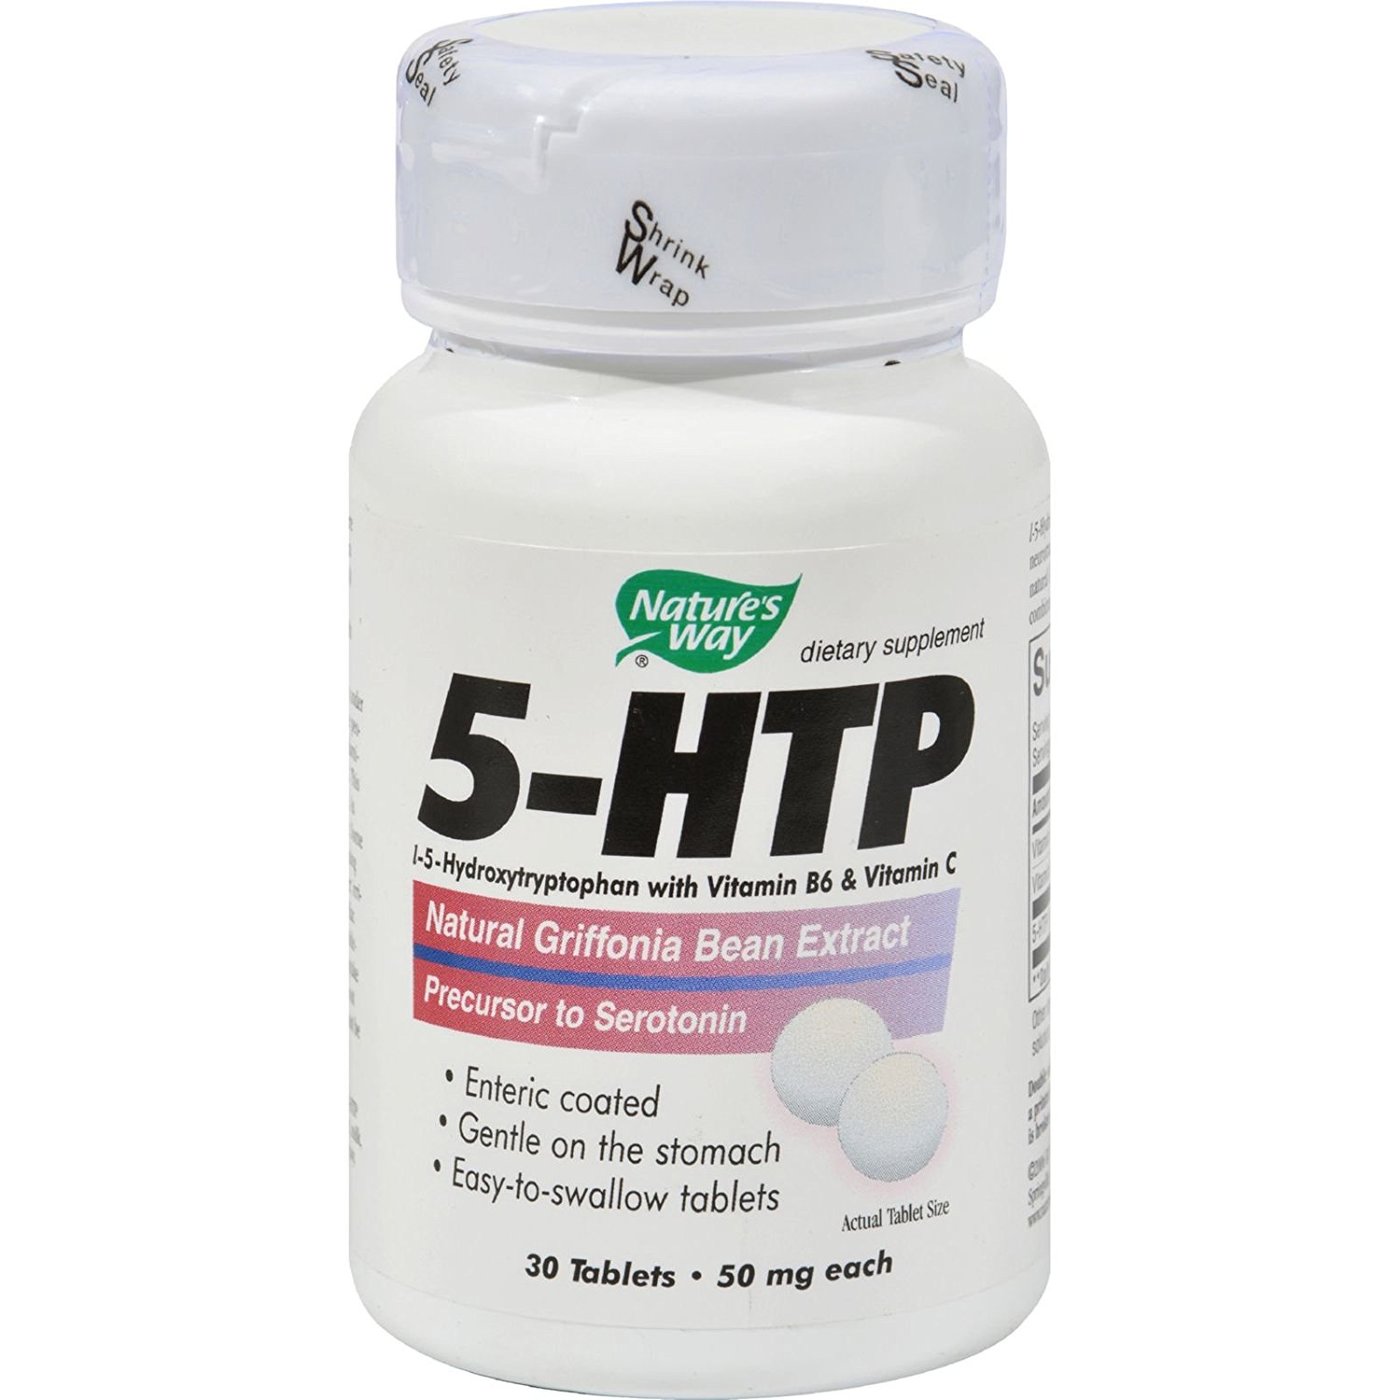 HOW TO USE PHENTERMINE AND 5 HTP TOGETHER